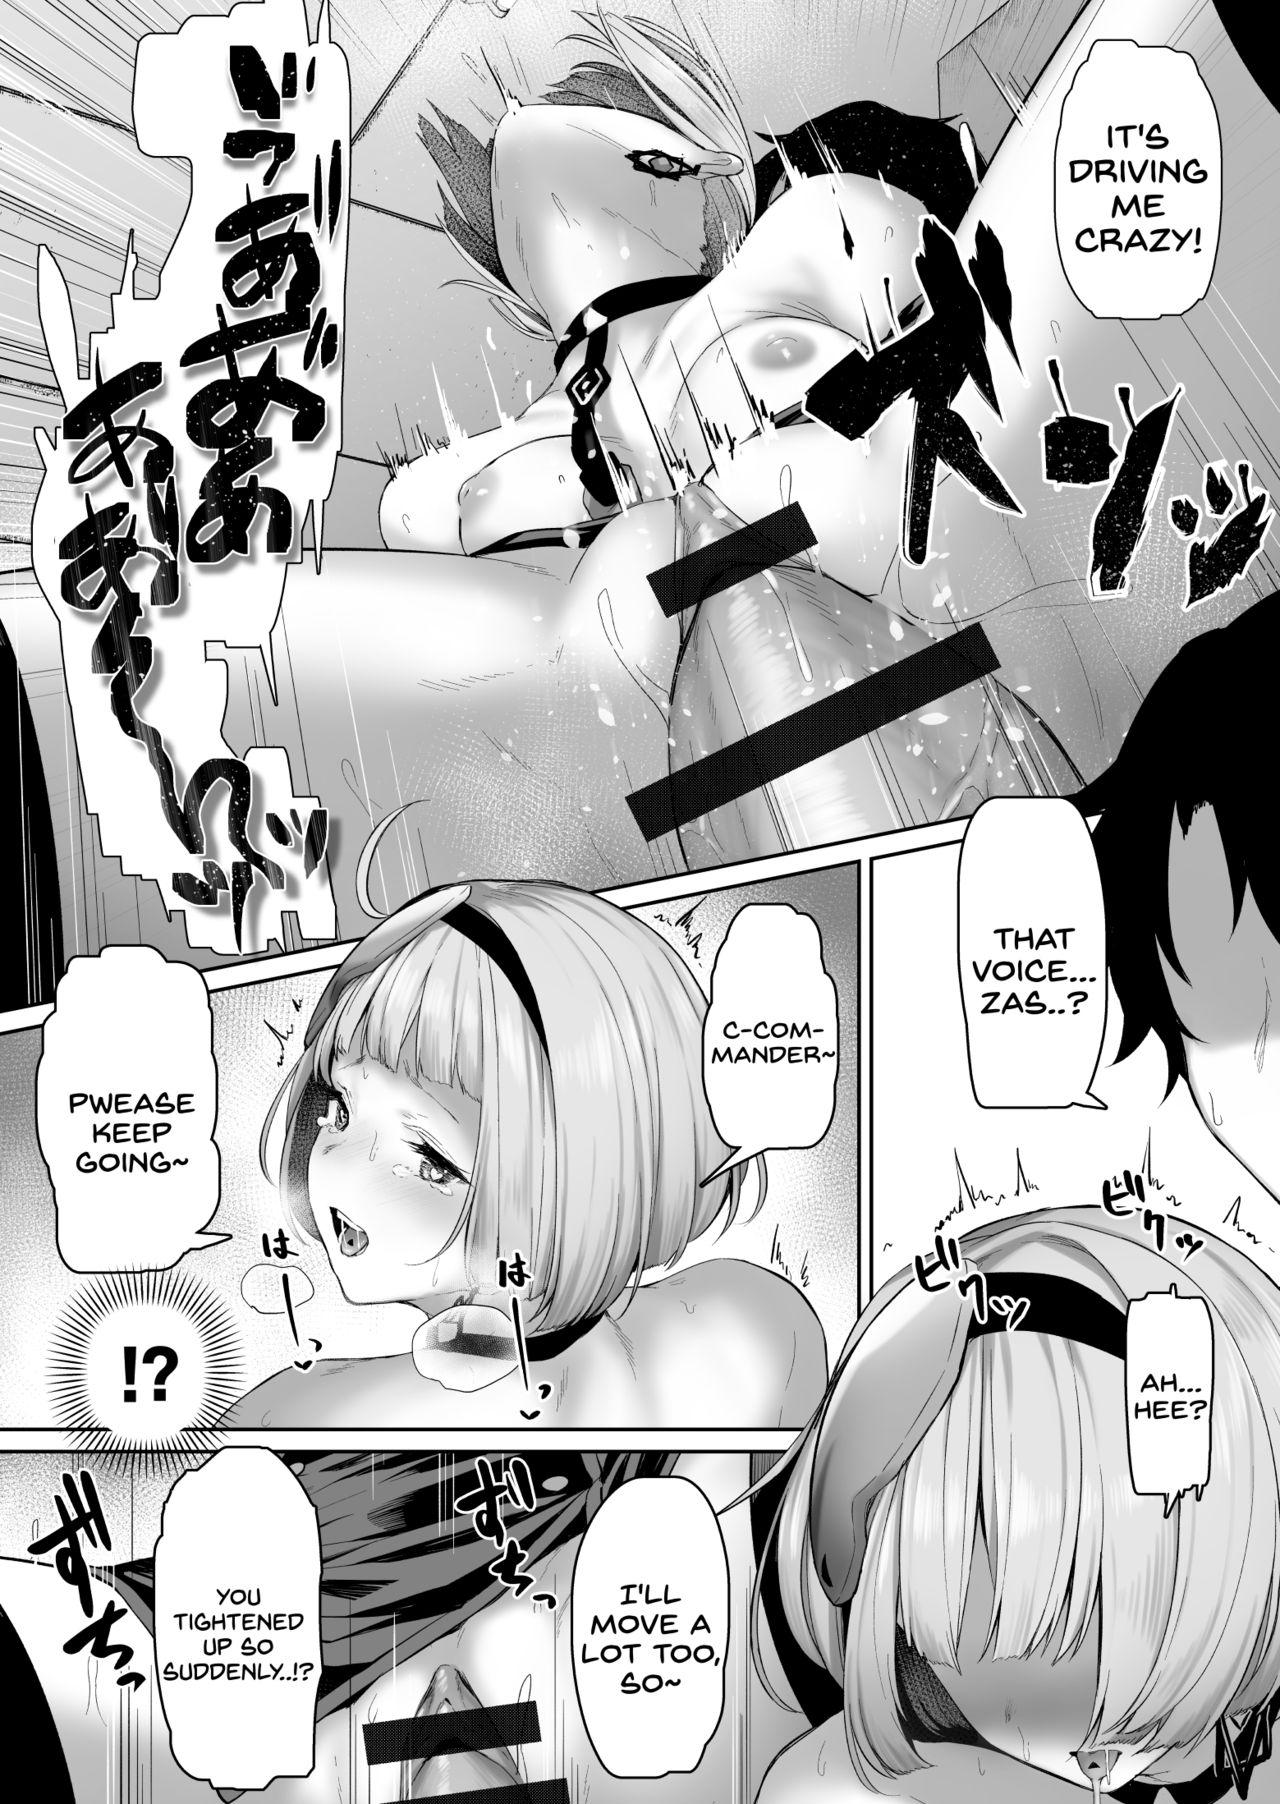 Toilet Zas M21 - Girls frontline Gay Pawn - Page 14